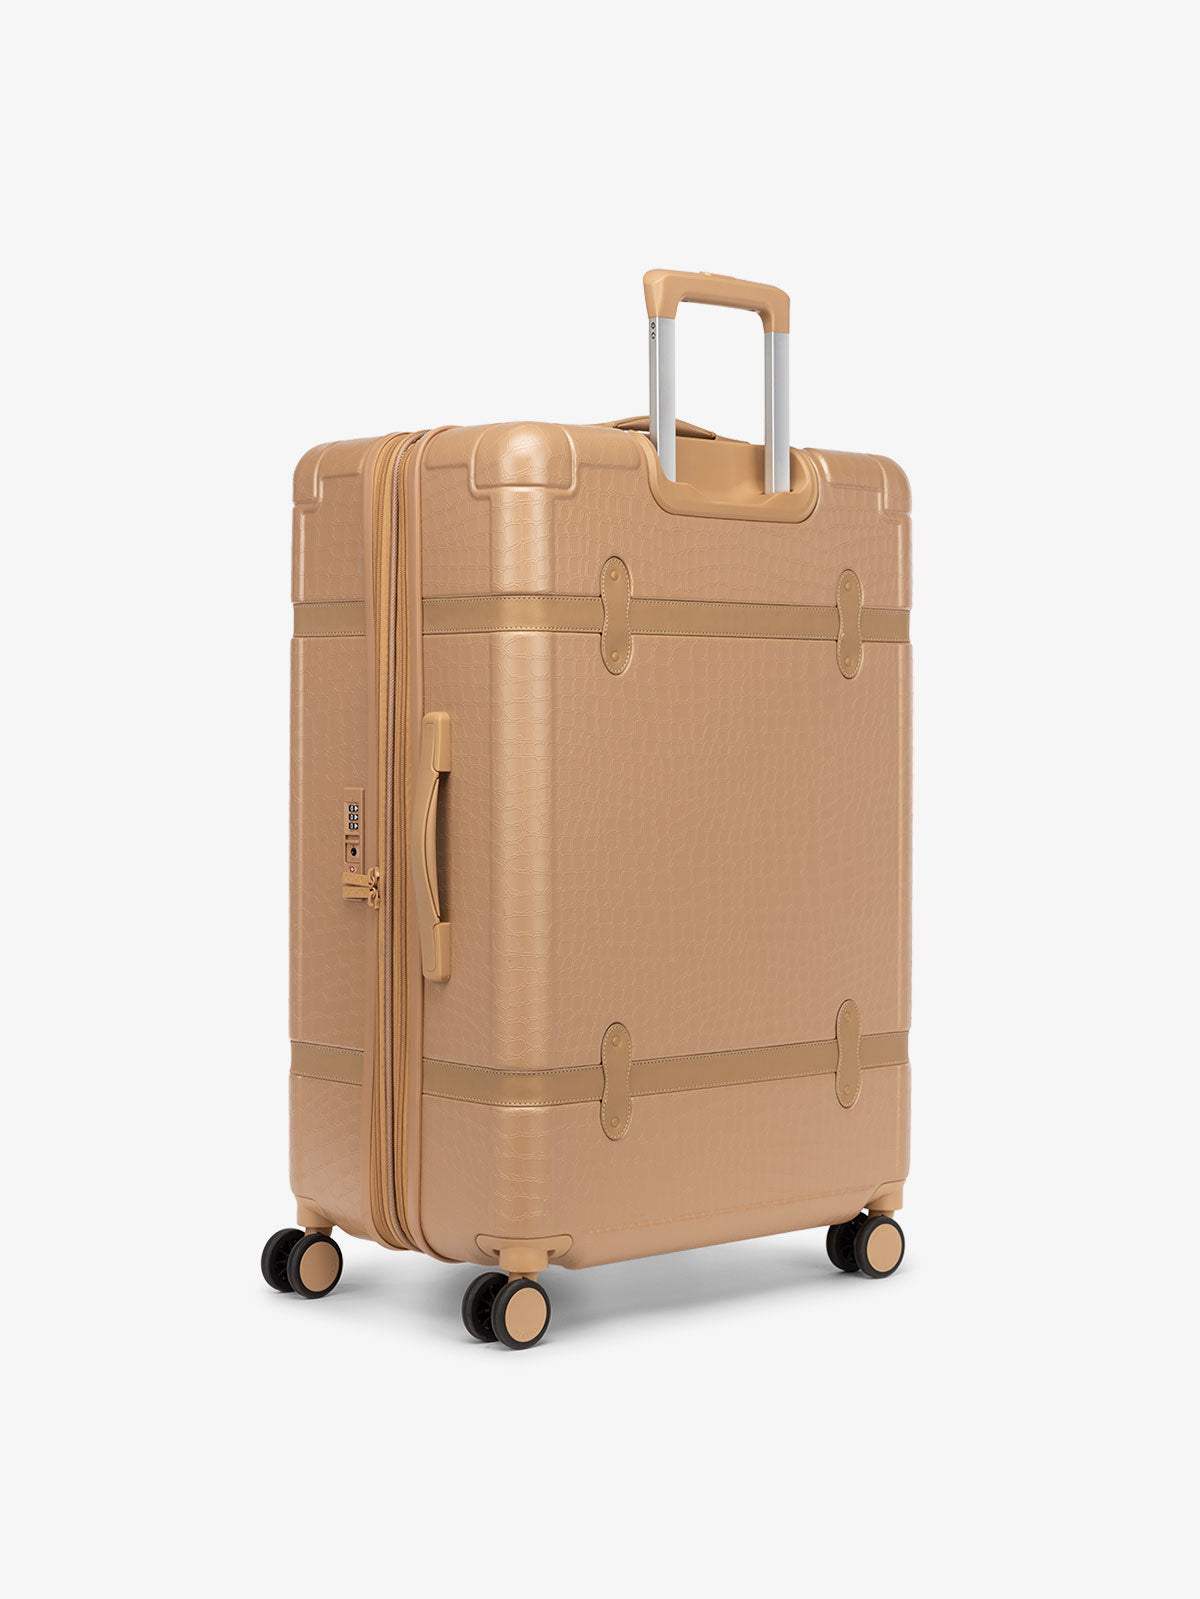 CALPAK TRNK 29 inch checked beige almond luggage with TSA approved locks